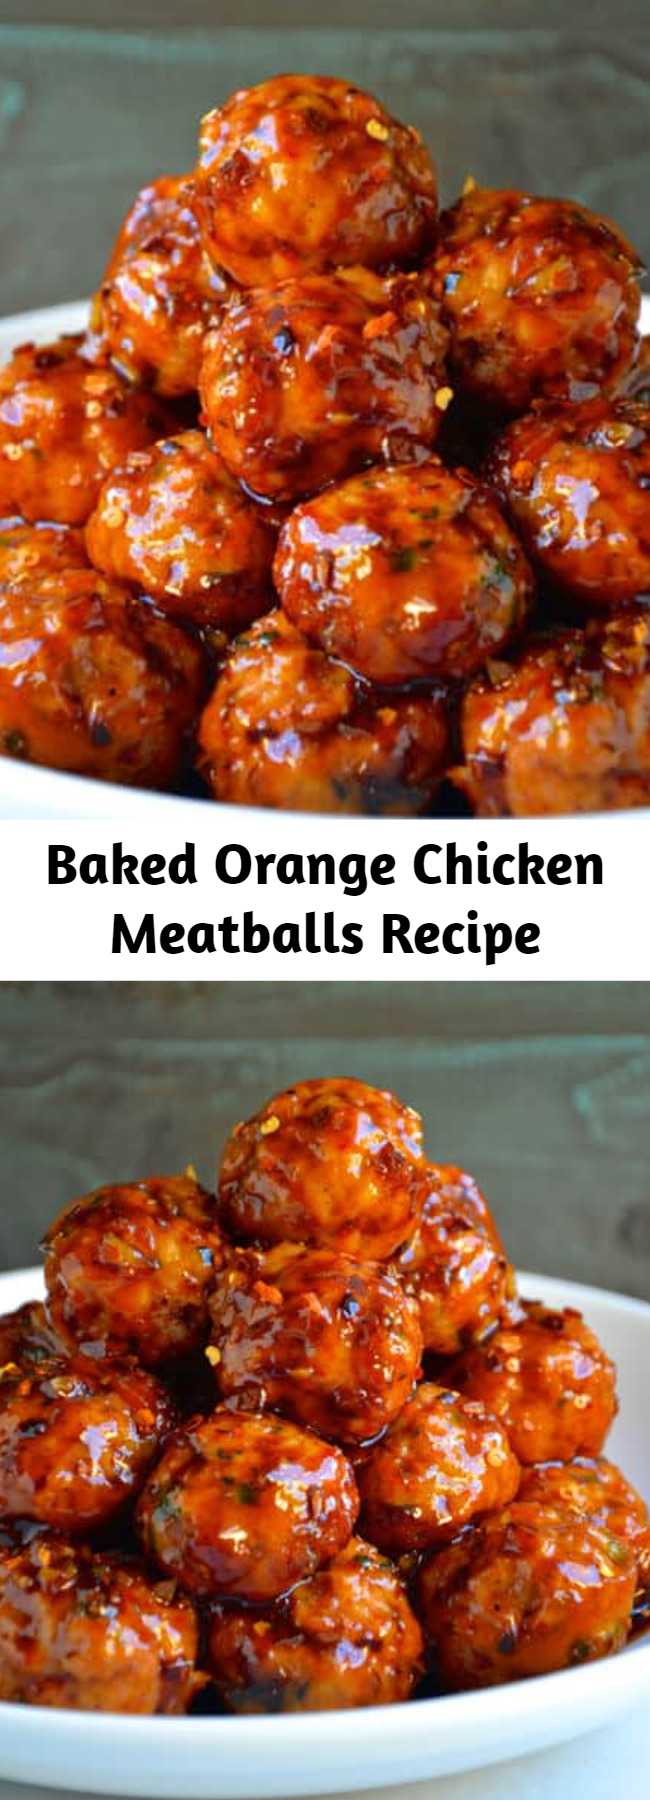 Best of all, these meatballs will be on your table in 30 minutes or less. They’re the perfect make-ahead weeknight meal, a school lunch standout, and the ultimate entrée to pair with homemade fried rice and chocolate-dipped fortune cookies. A fake-out for takeout has never been easier!